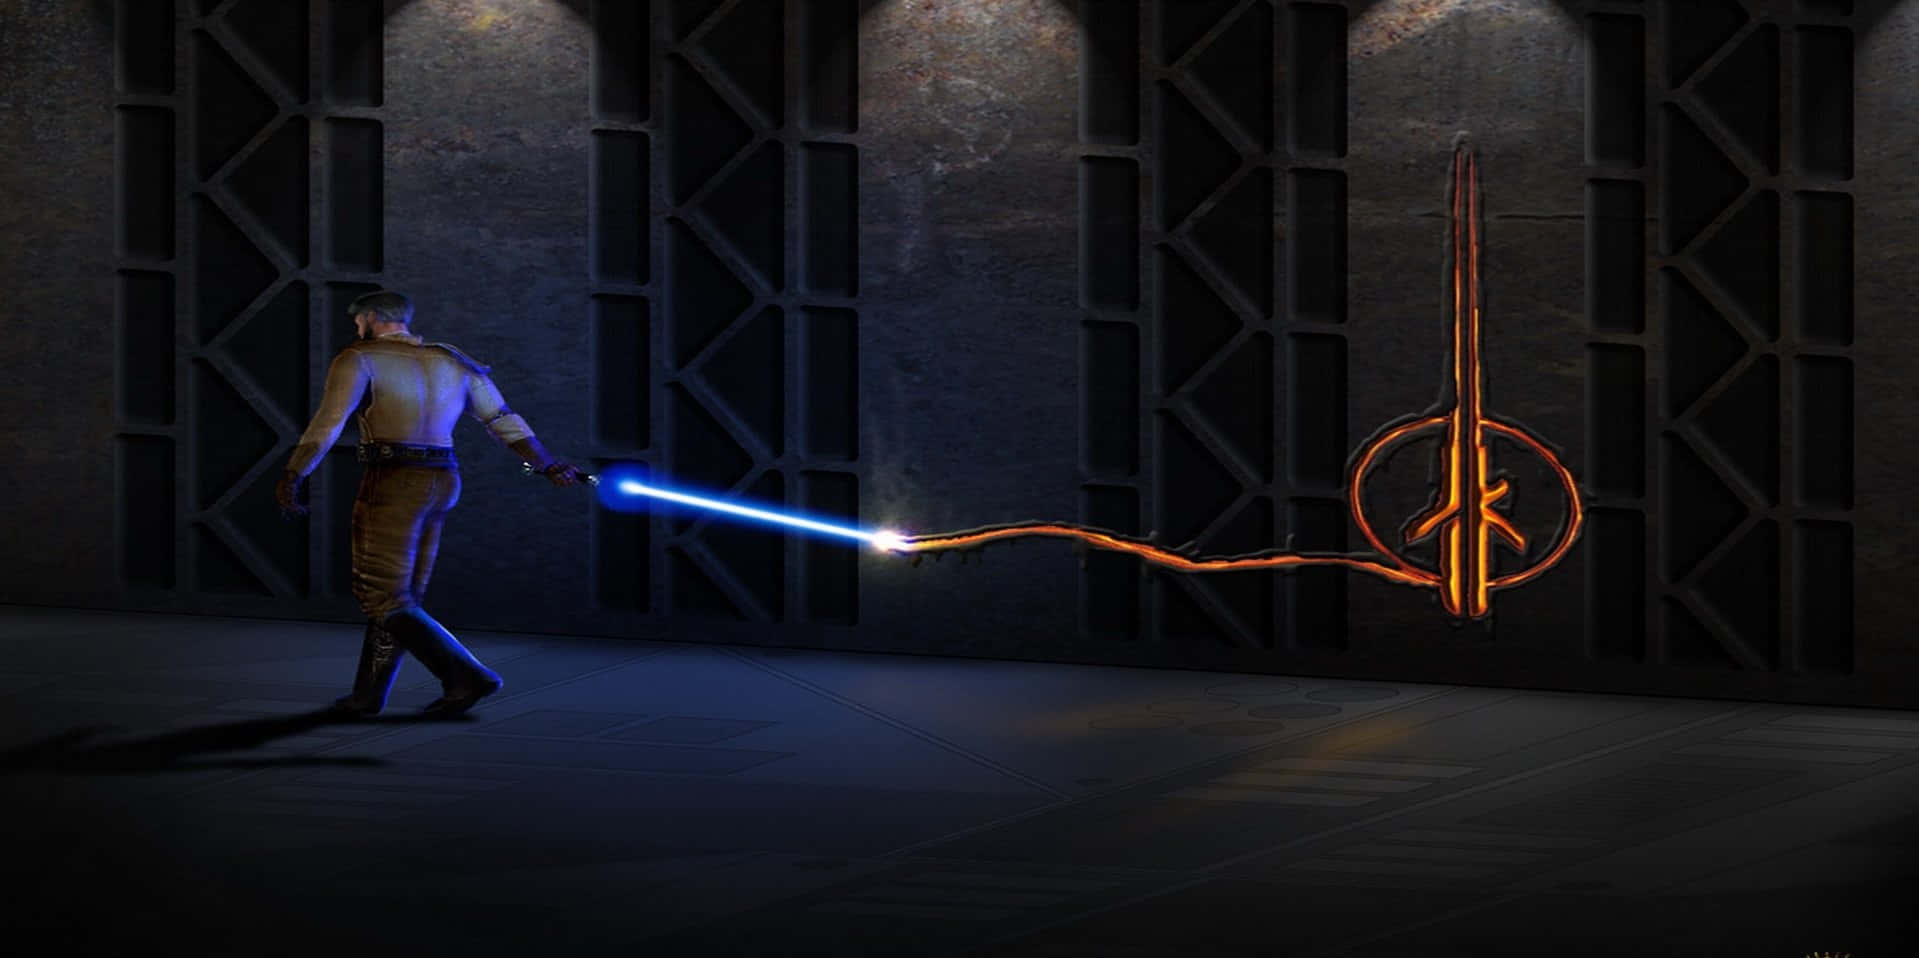 The Jedi Knight Brings Balance to the Force" Wallpaper